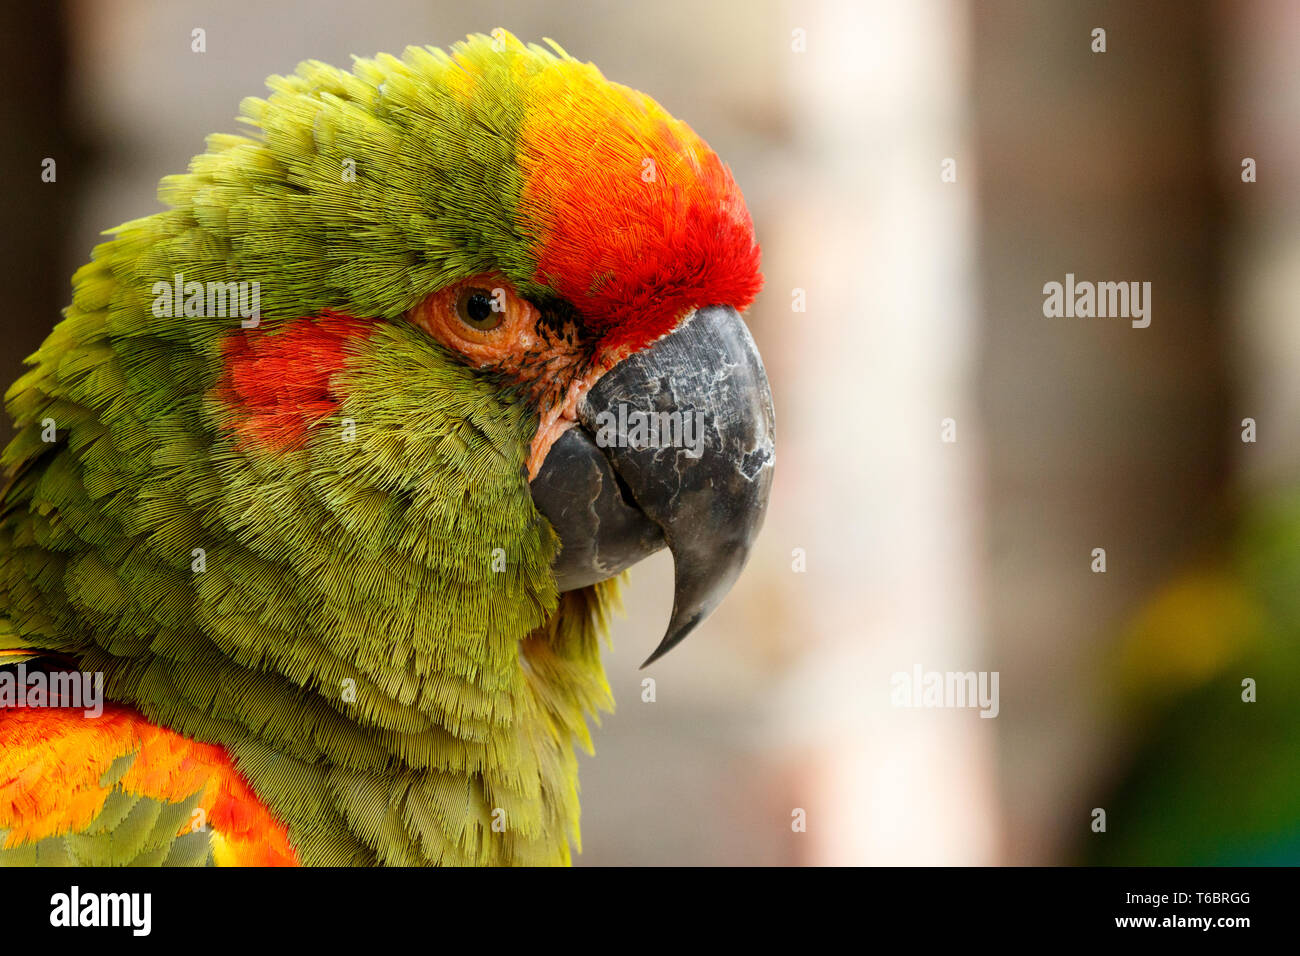 Parrot sitting and looking at you Stock Photo